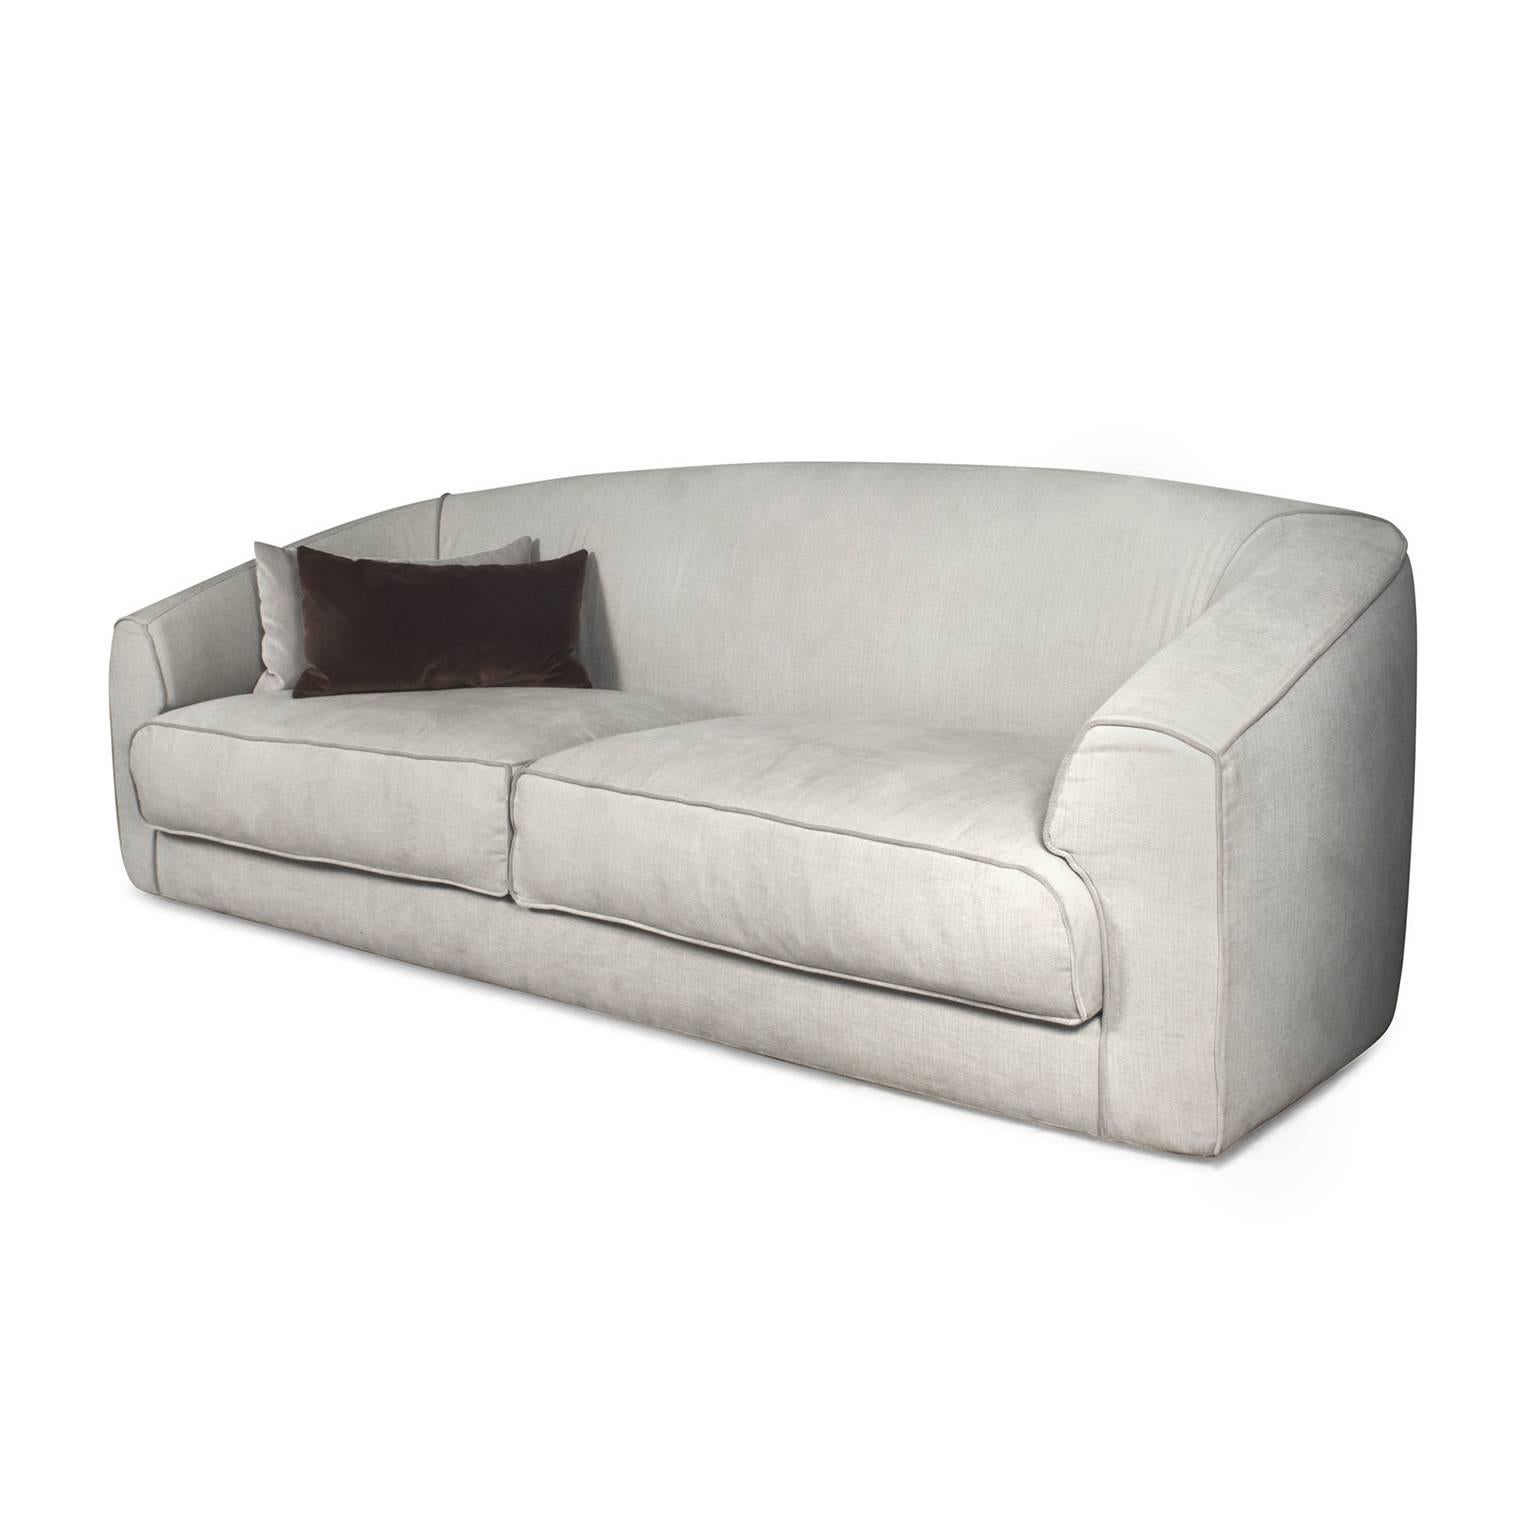 Sofa with solid wood frame designed by Massimiliano Raggi. Comes with two cushions.